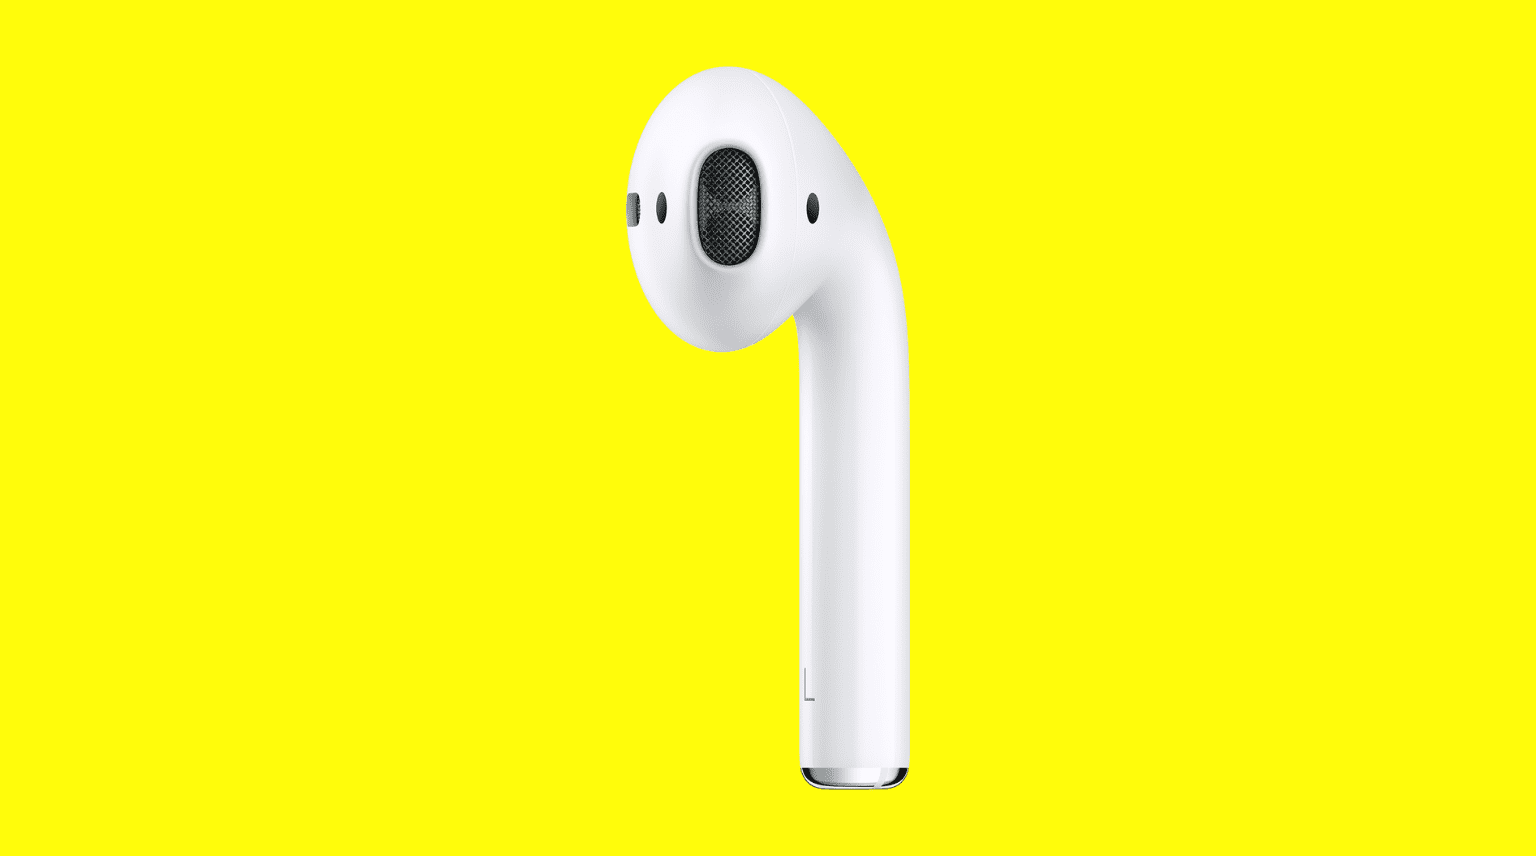 Single AirPod on a solid yellow background